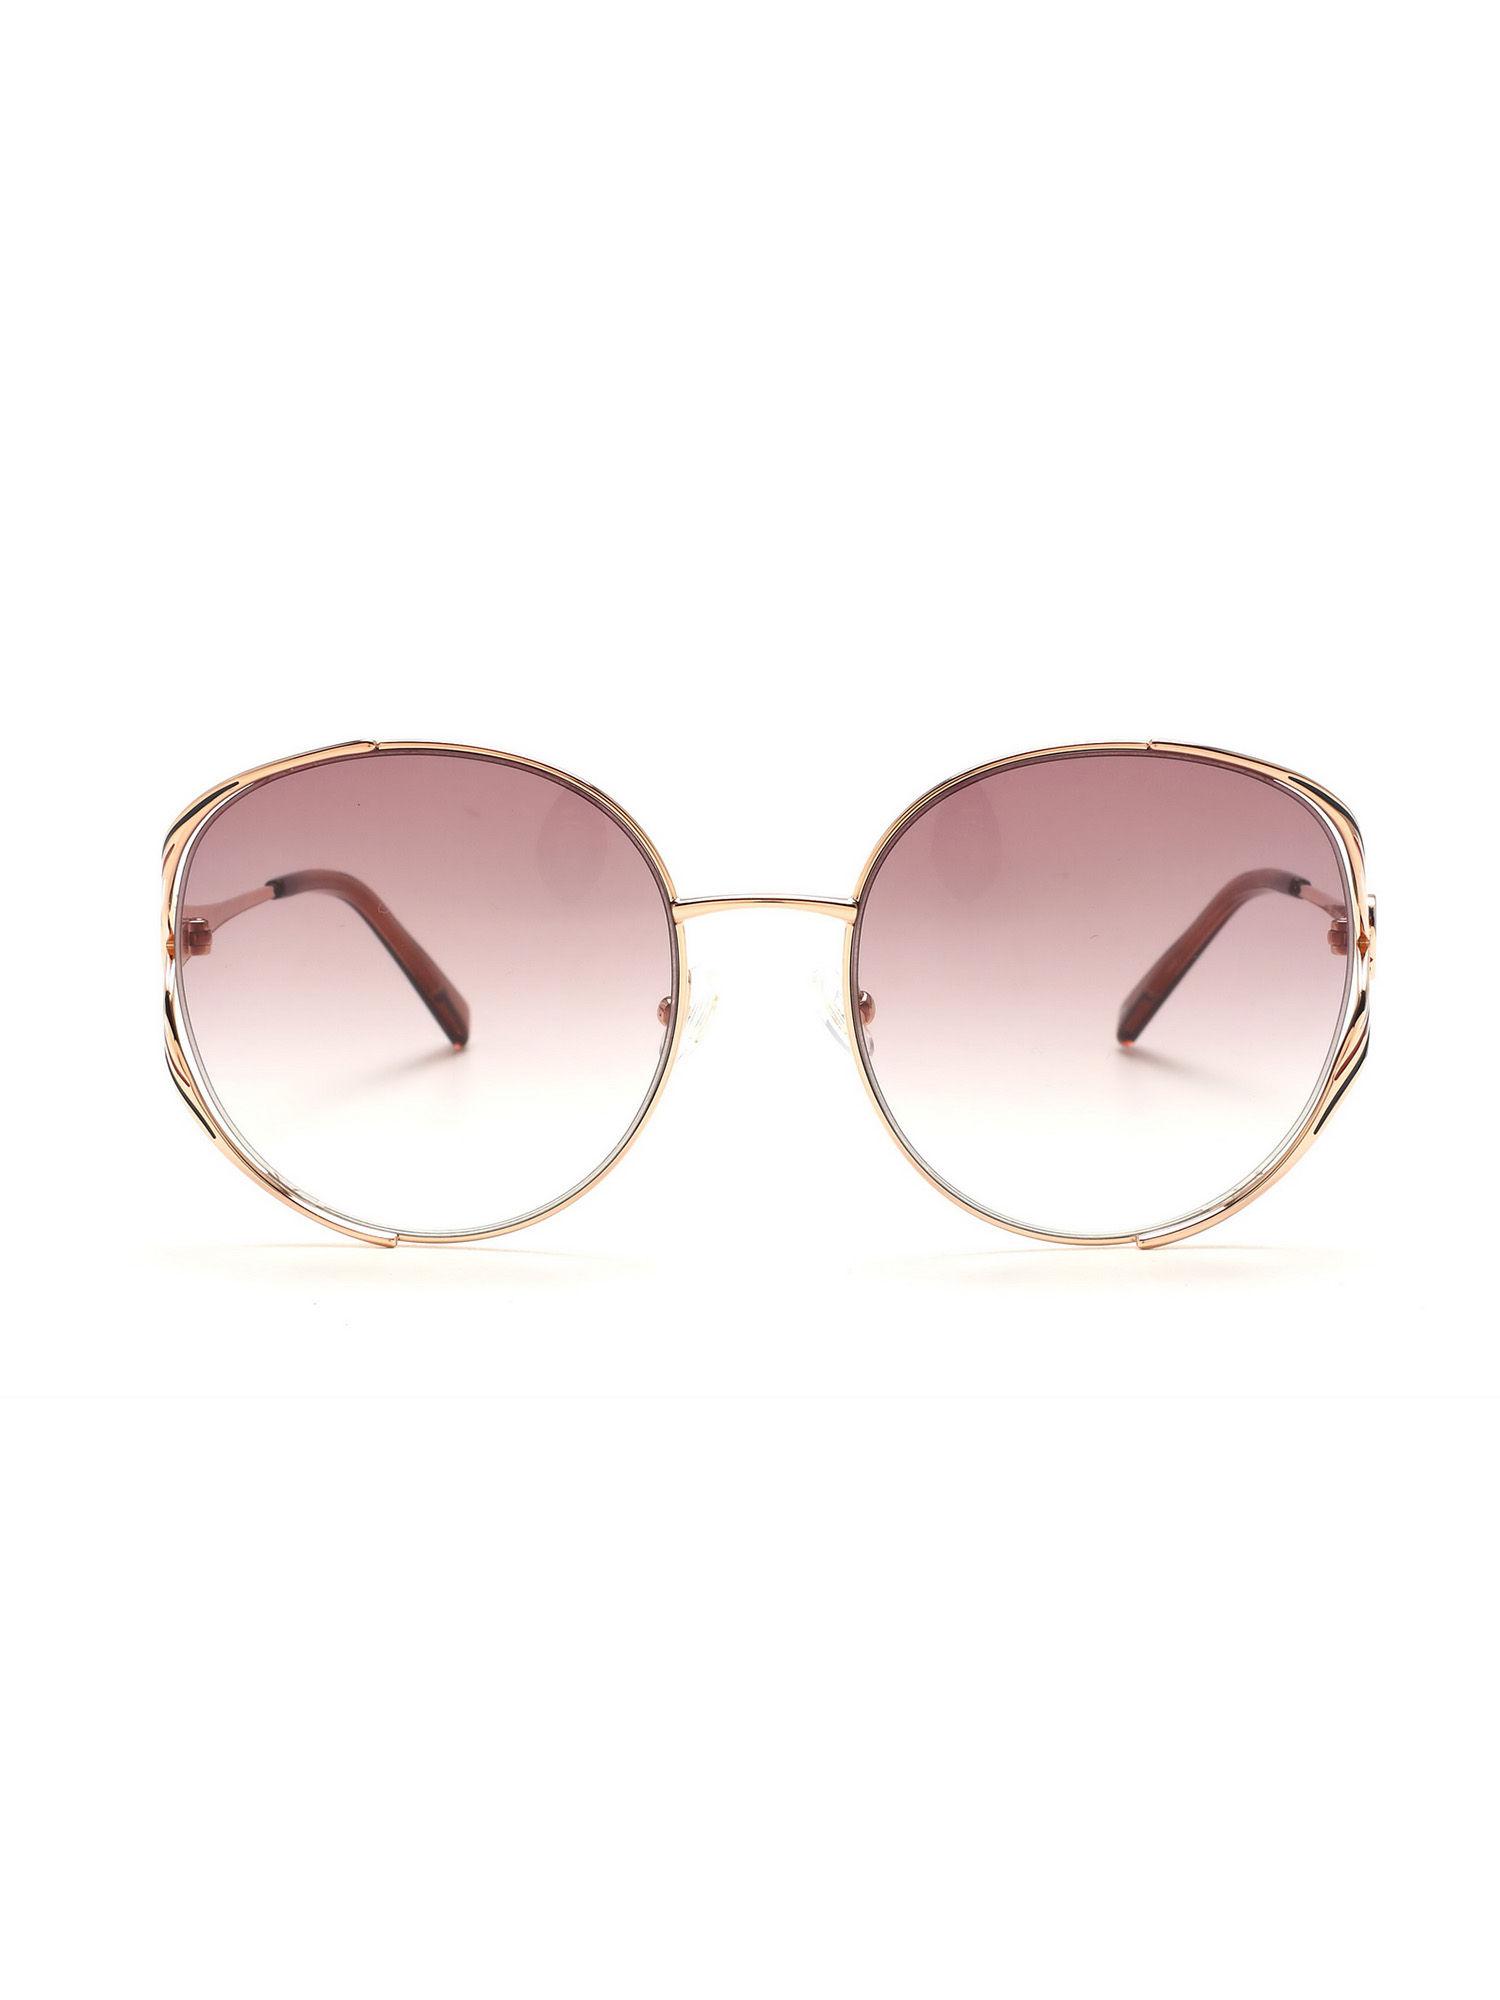 pink round sunglasses full rim rose gold frame with gradient